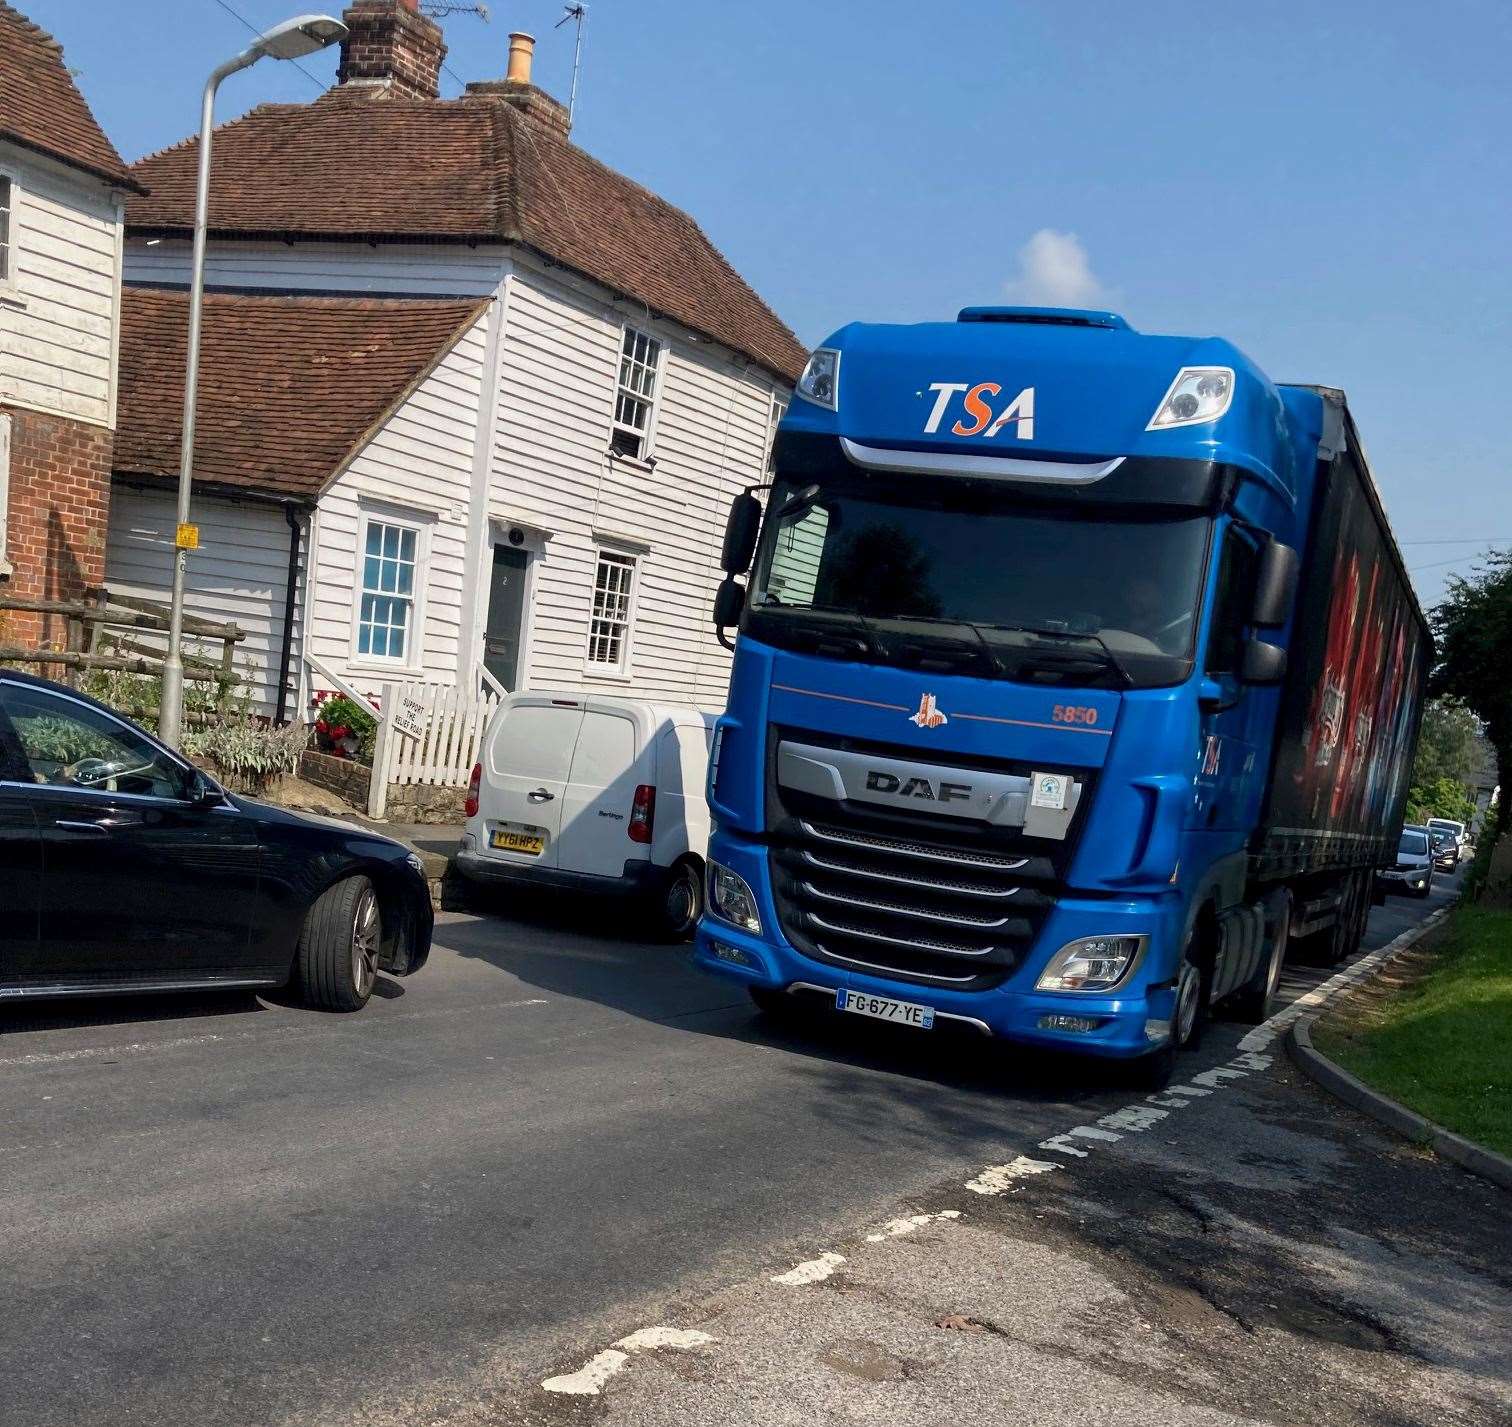 A lorry caught headed down one of the narrow streets